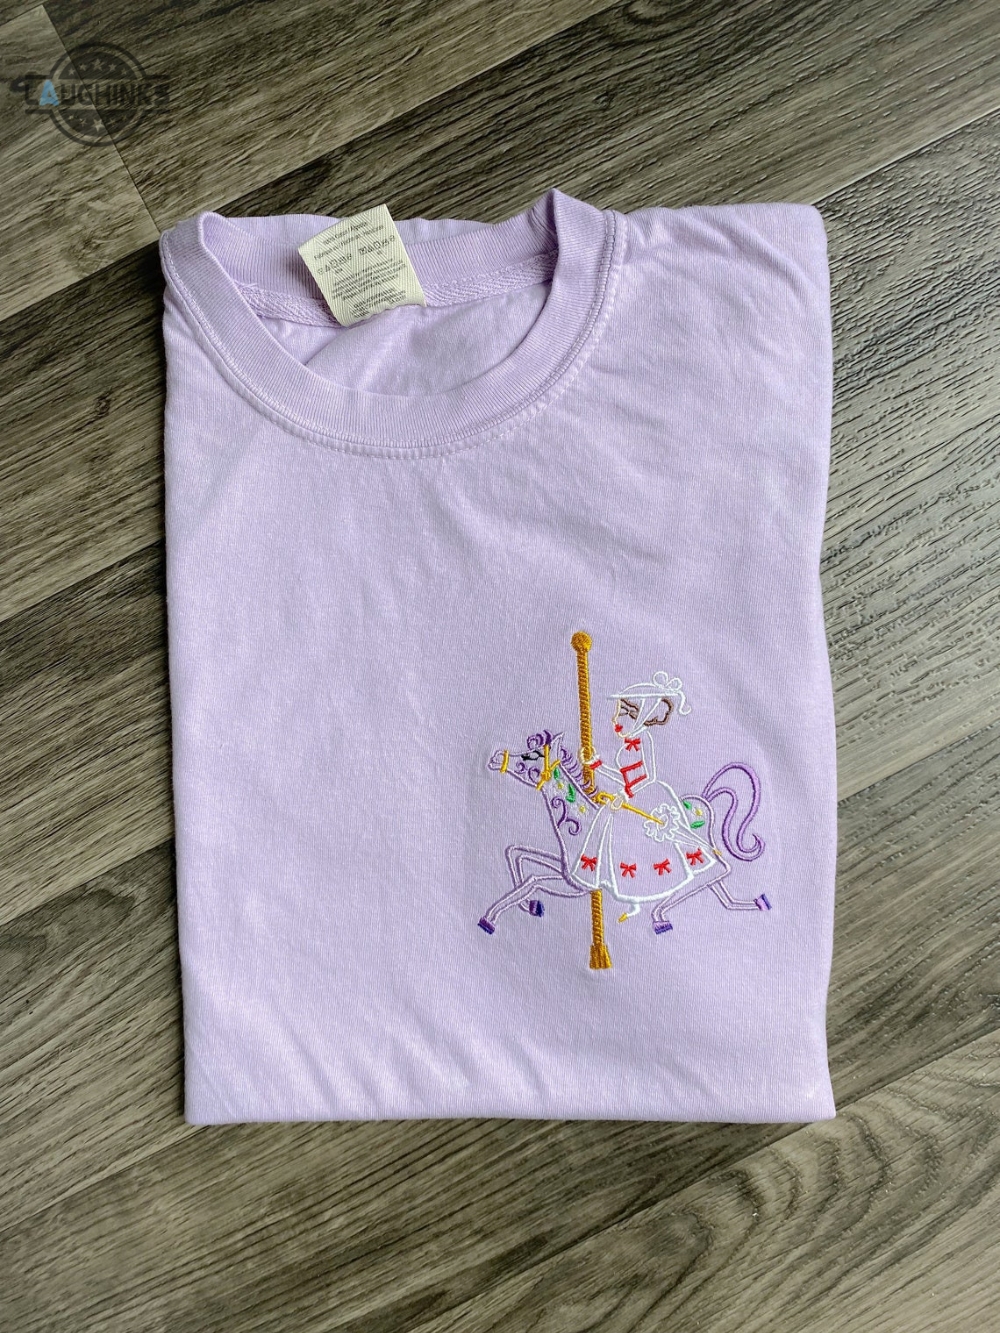 Mary Poppins Carousel Embroidered T Shirt Disney World Embroidered T Shirt Disneyland Embroidered T Shirt Embroidered Tank Top Embroidery Tshirt Sweatshirt Hoodie Gift